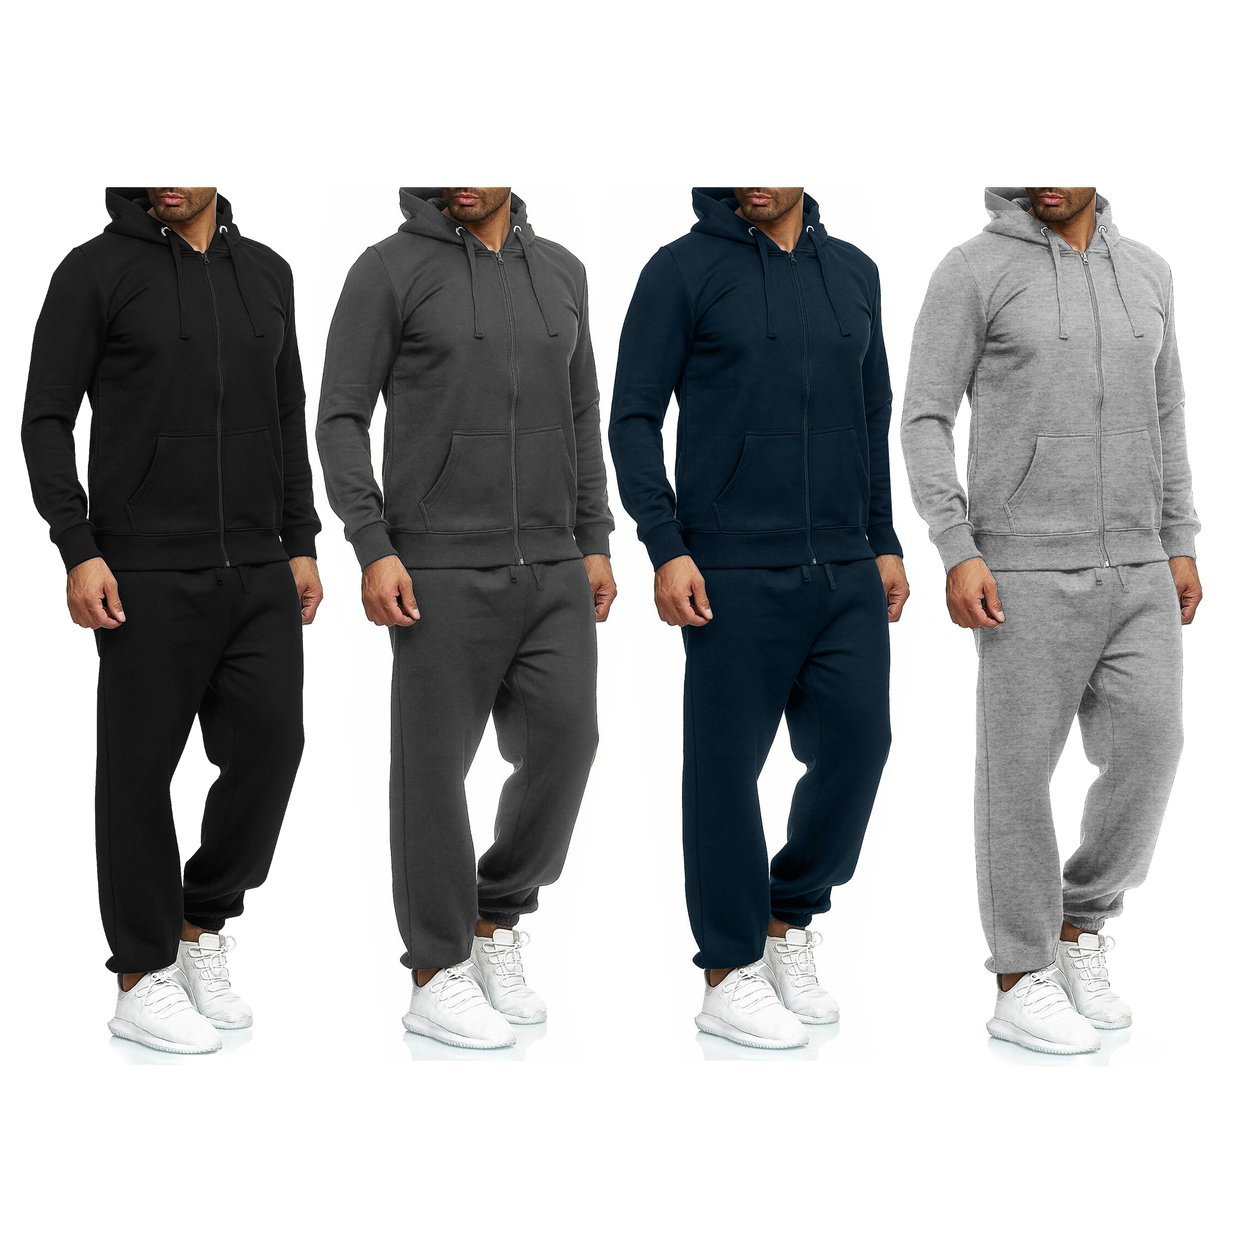 Multi-Pack: Men's Casual Big & Tall Athletic Active Winter Warm Fleece Lined Full Zip Tracksuit Jogger Set - Grey, 1-pack, Large